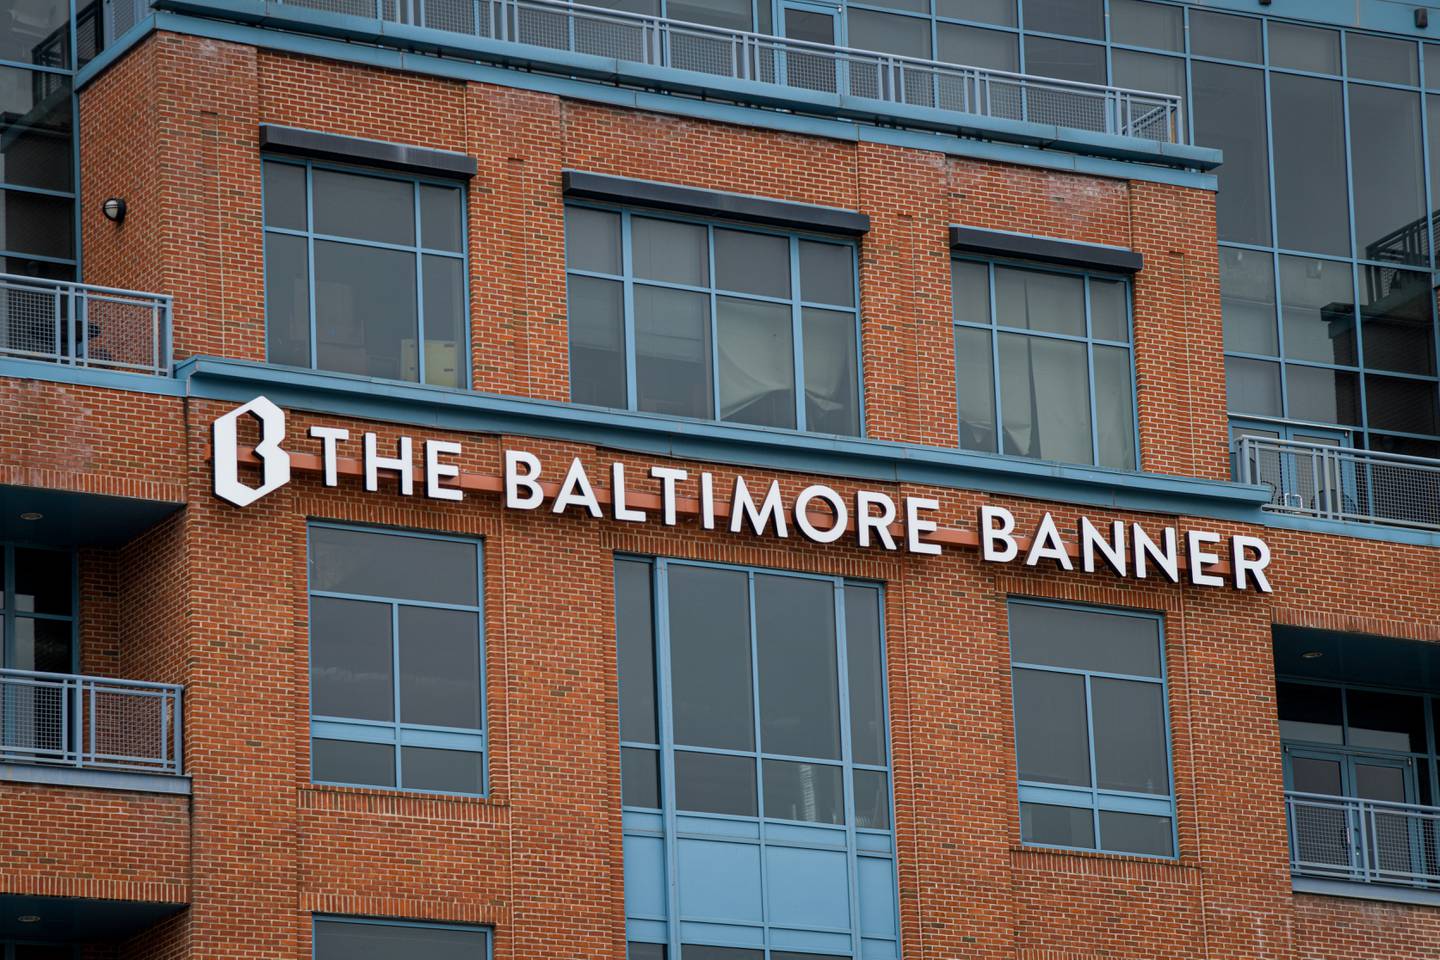 The Baltimore Banner Sign is affixed to the Power Plant Building in downtown Baltimore.